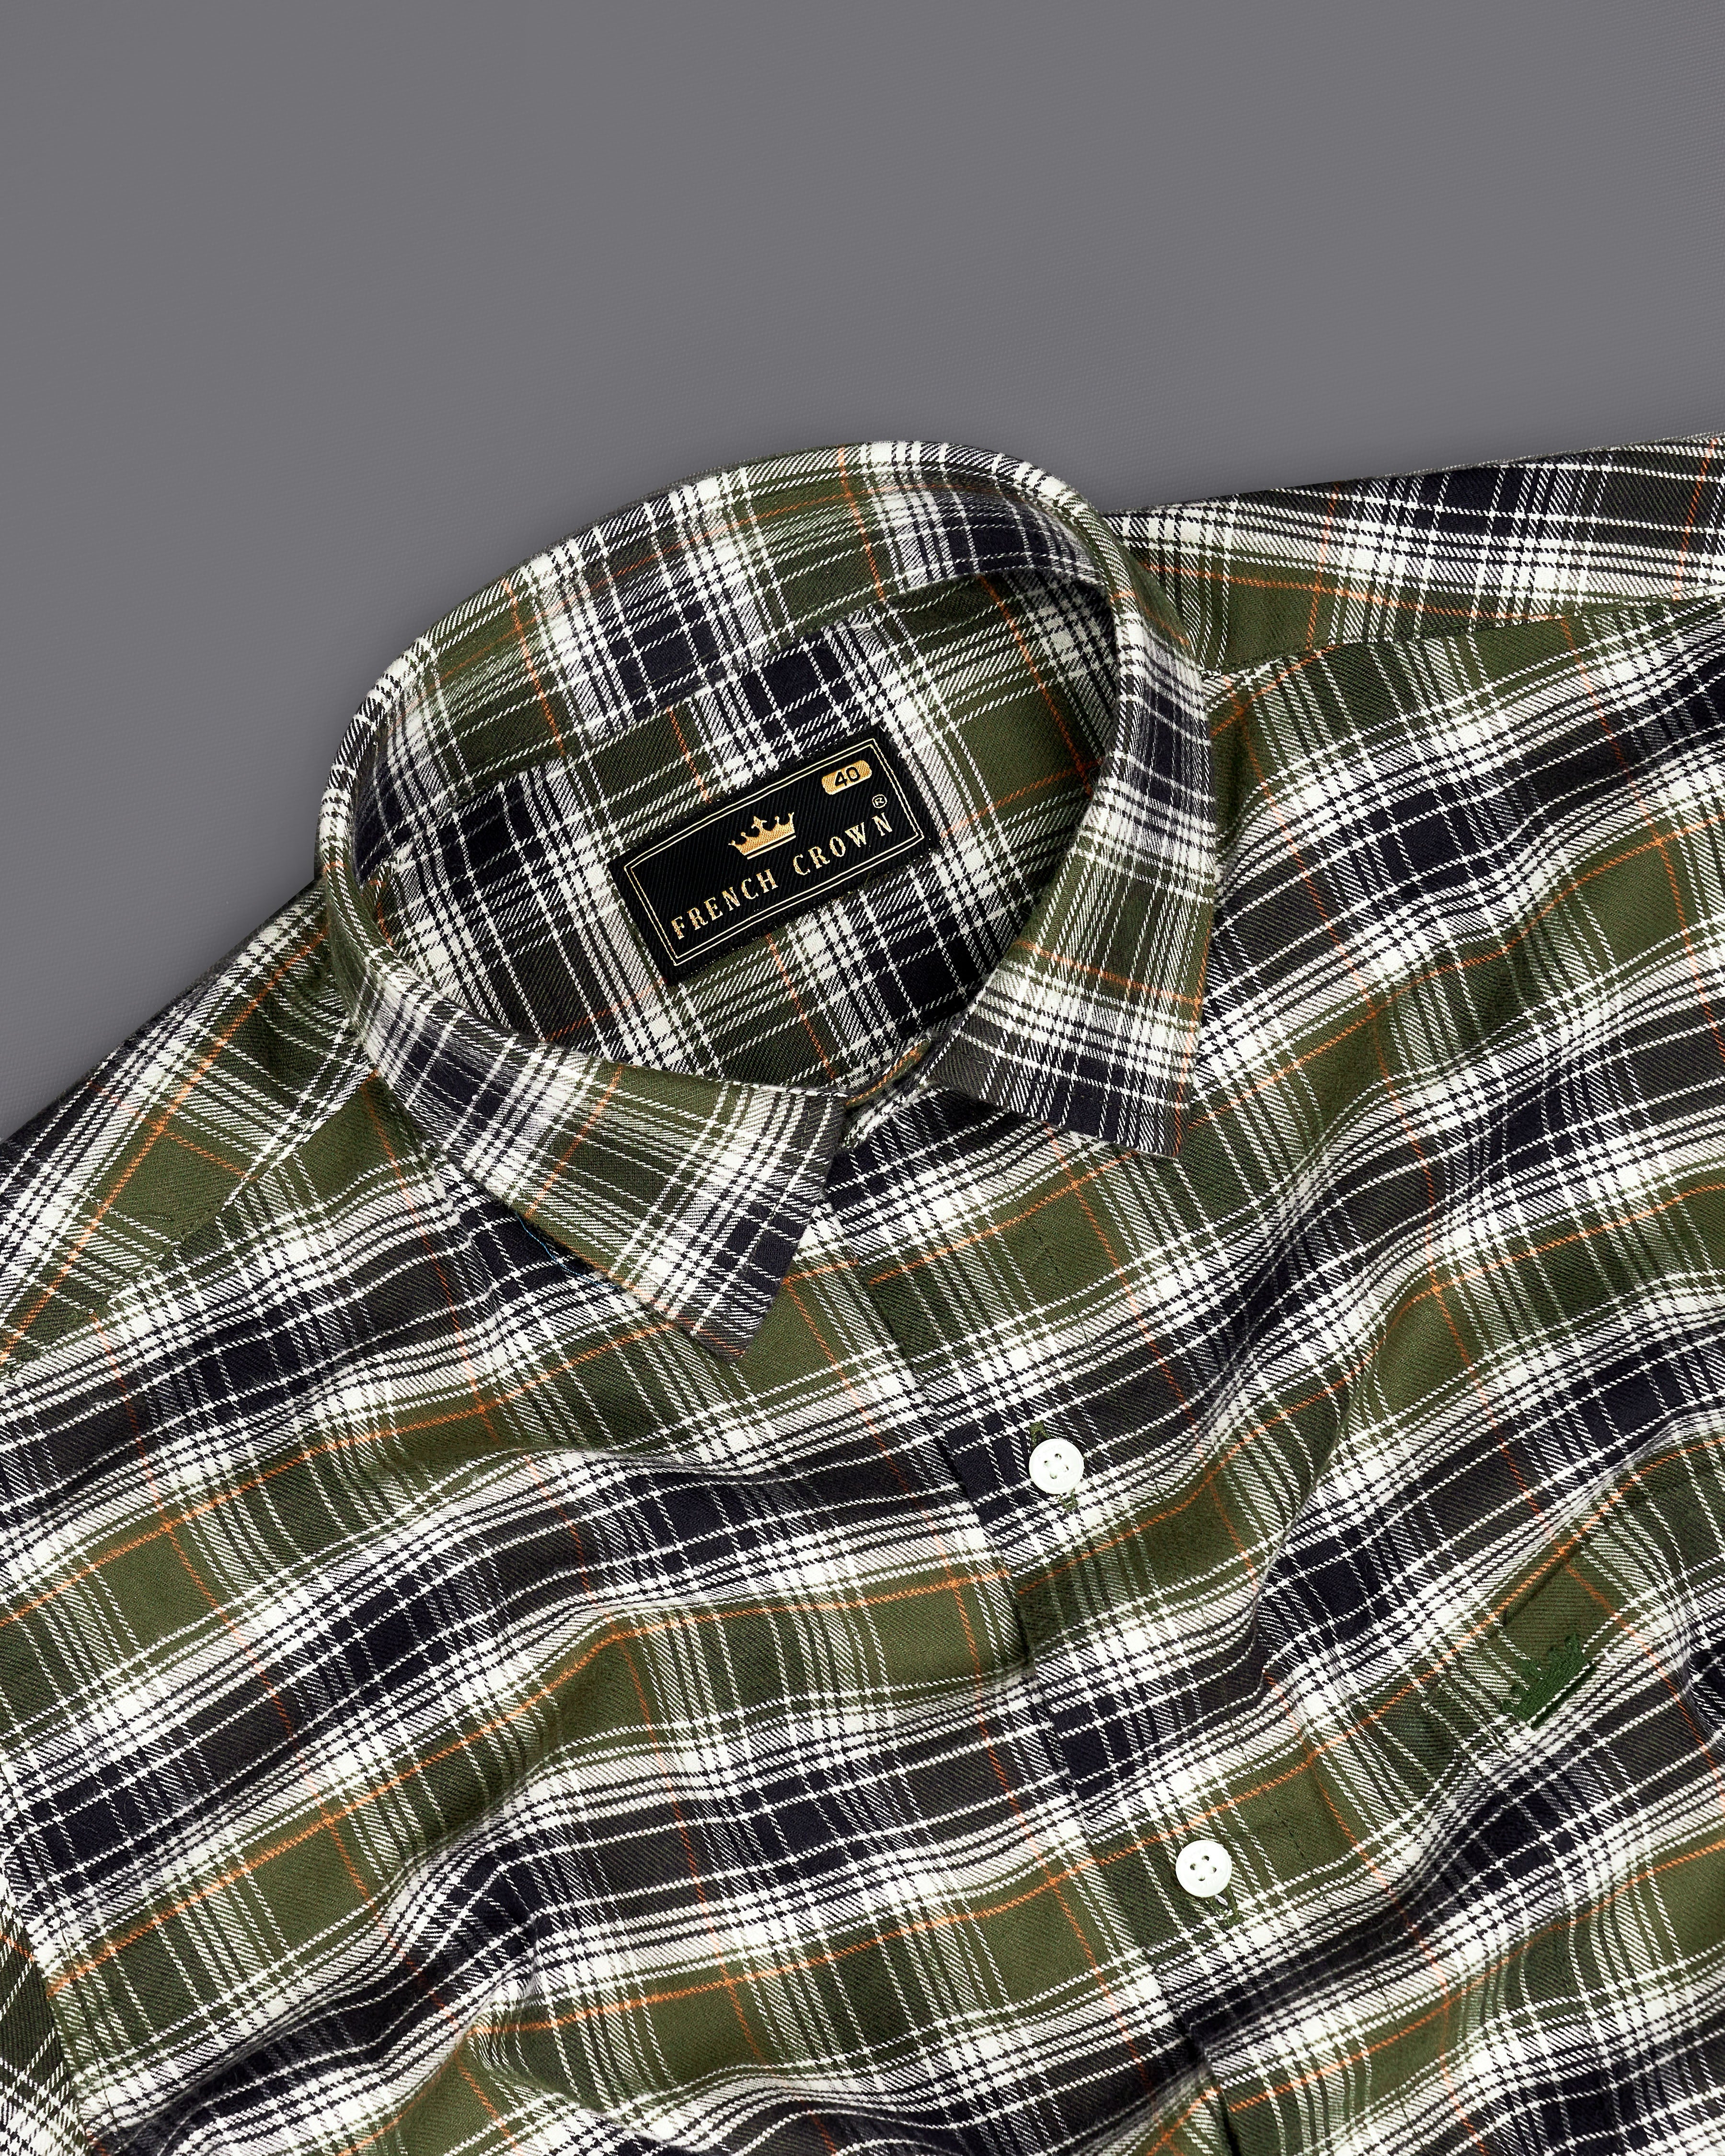 Camouflage Green with Zeus Black Plaid Flannel Shirt 9084-38, 9084-H-38, 9084-39, 9084-H-39, 9084-40, 9084-H-40, 9084-42, 9084-H-42, 9084-44, 9084-H-44, 9084-46, 9084-H-46, 9084-48, 9084-H-48, 9084-50, 9084-H-50, 9084-52, 9084-H-52